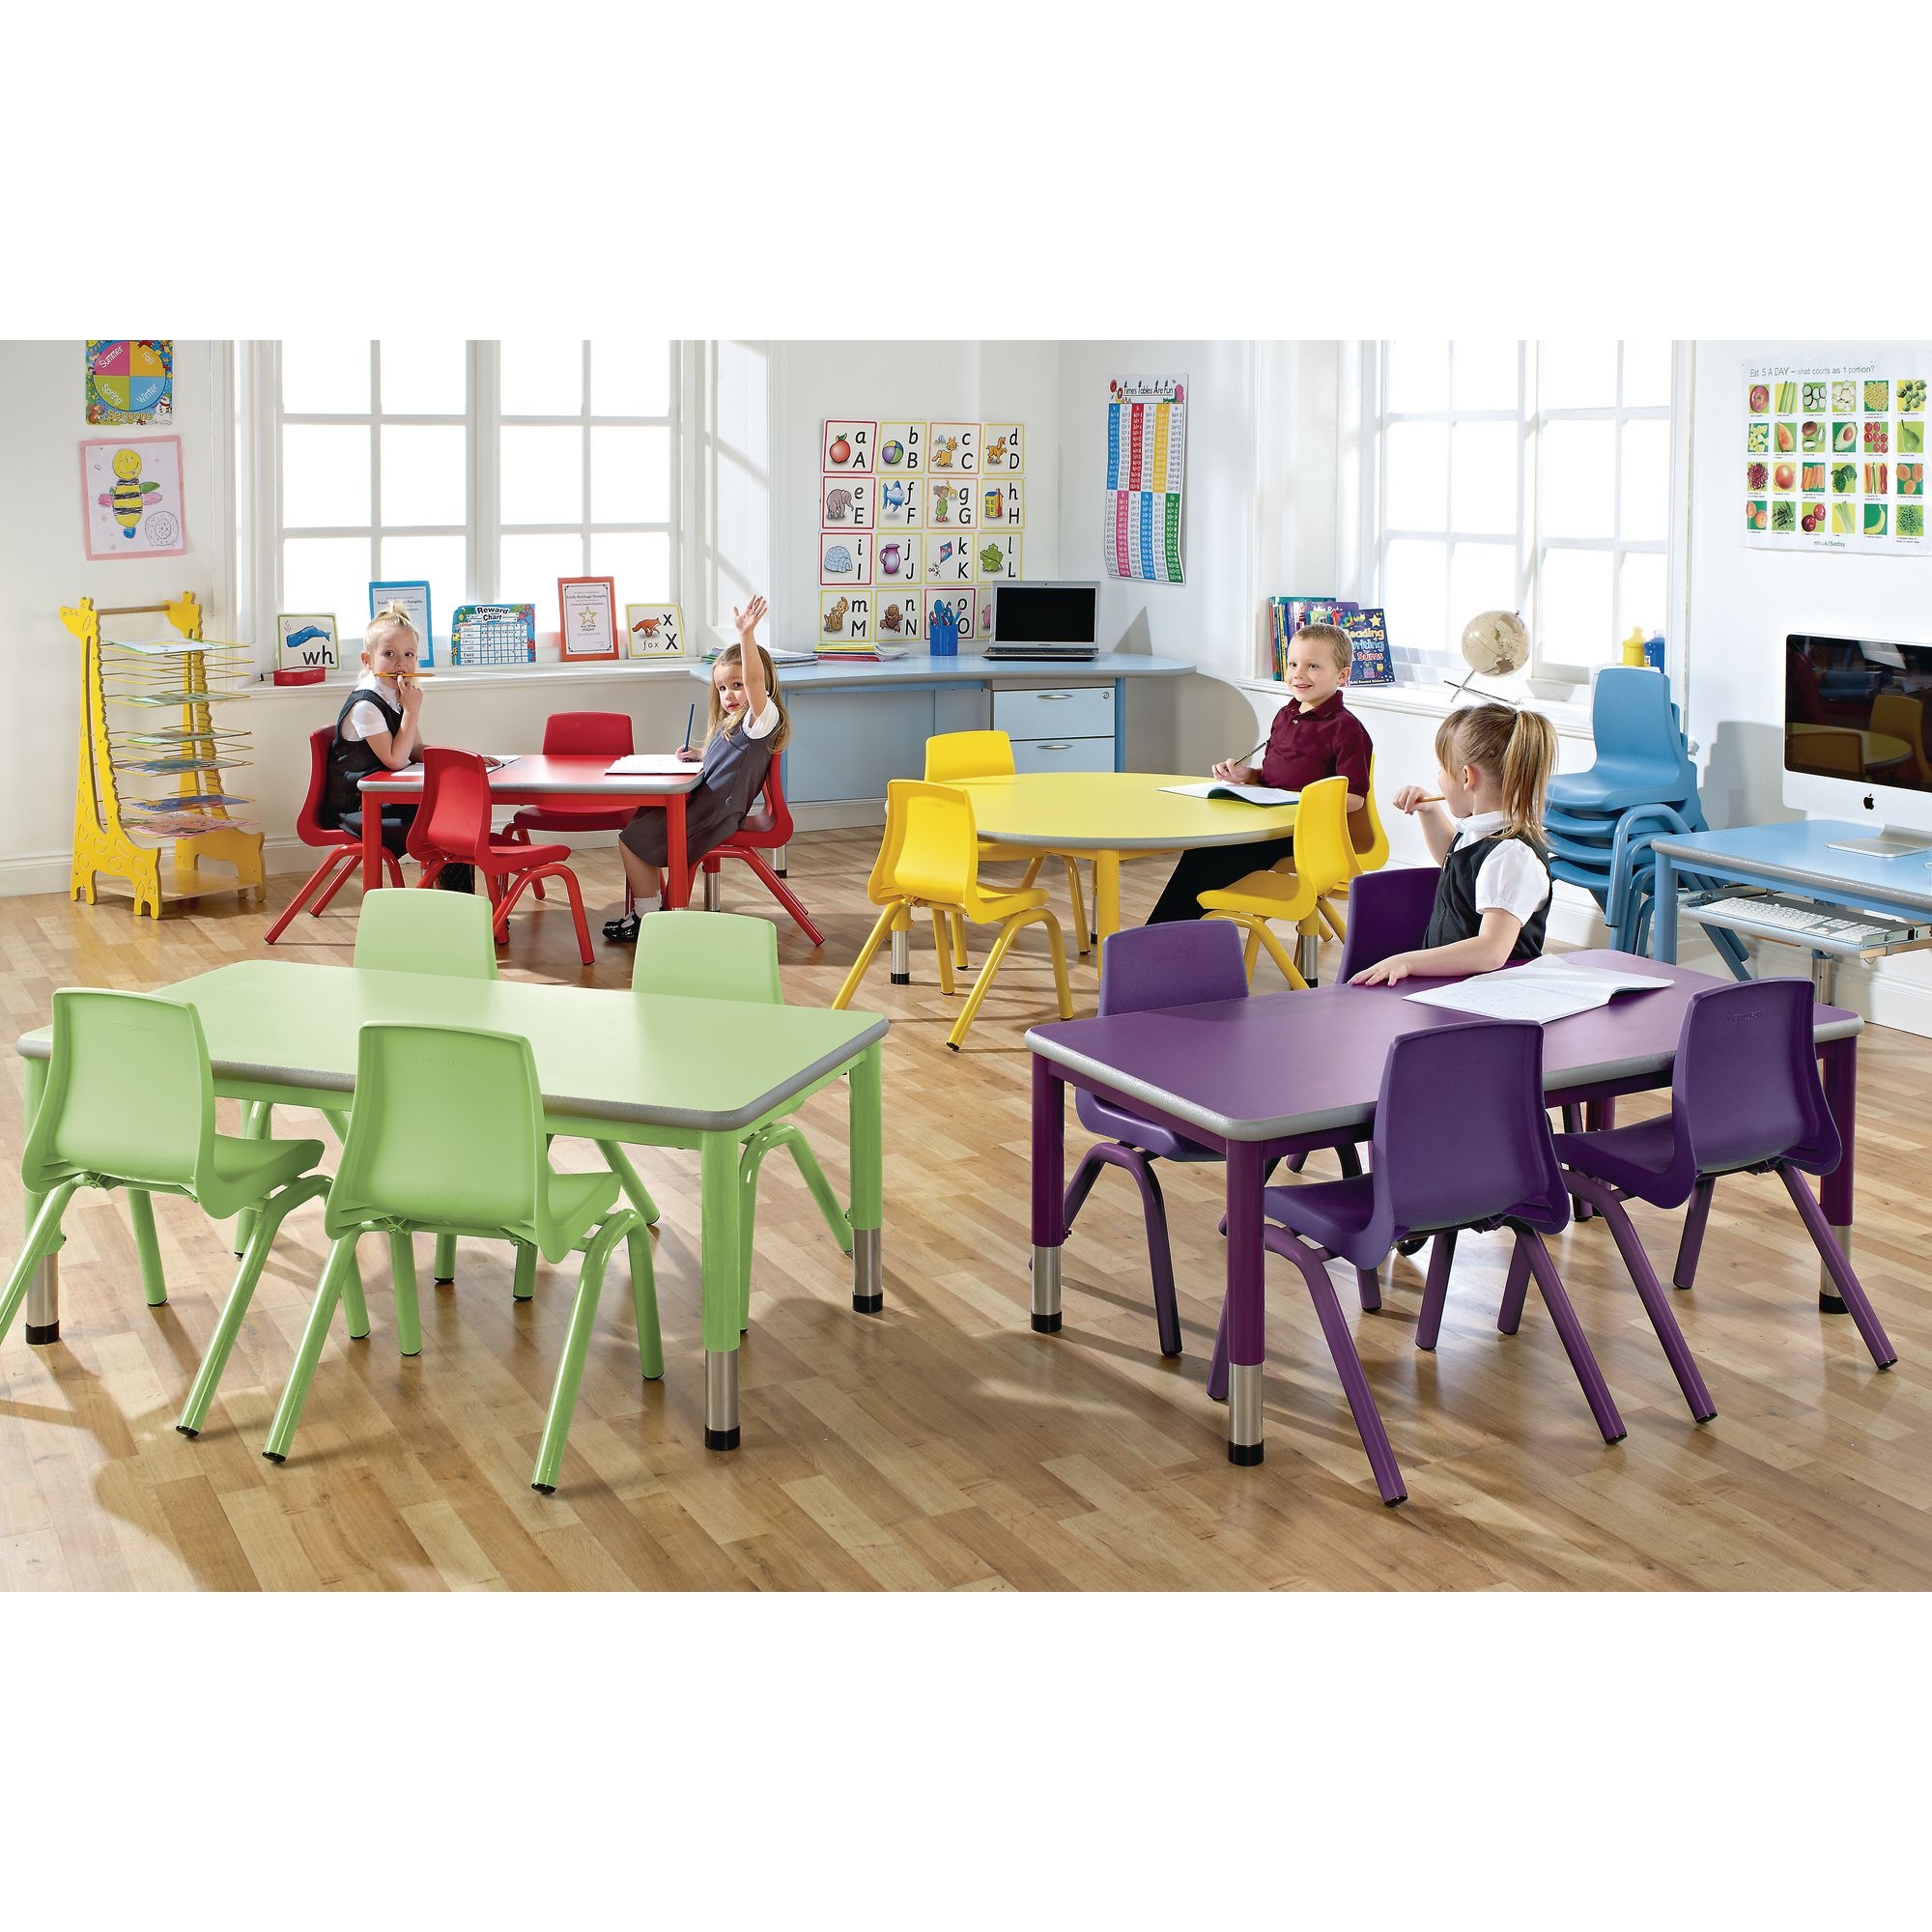 Harlequin Rectangular Height Adjustable Steel Classroom Pack: Table and 4 Chairs - 900 x 600 x 640mm - Soft Blue